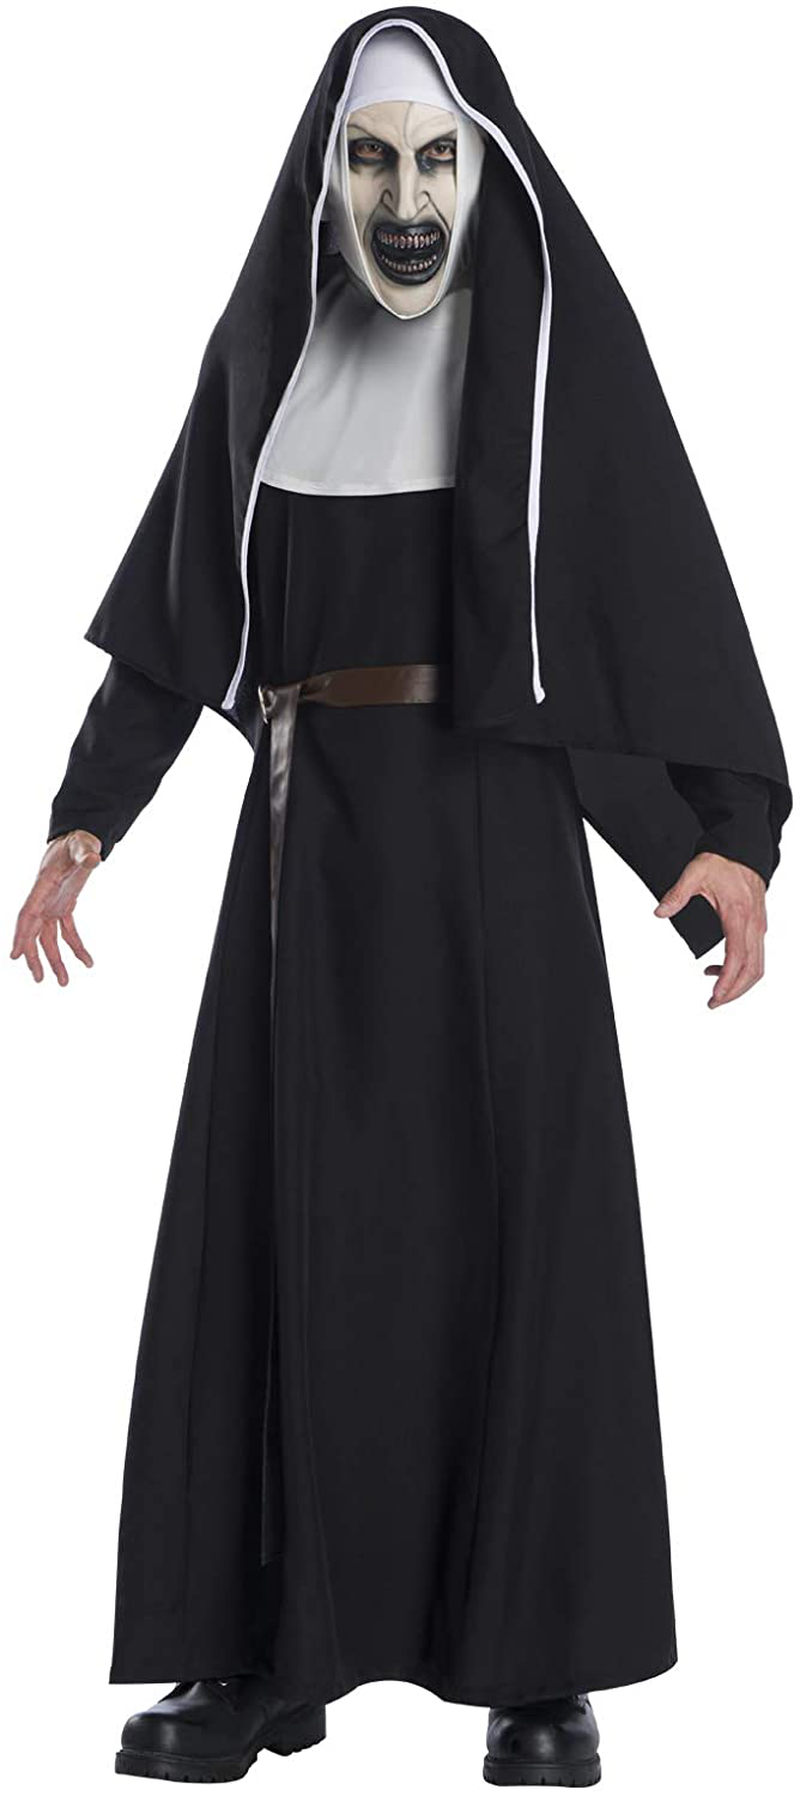 Rubie's Scary The Nun Movie Deluxe Costume for Adults Apparel & Accessories > Costumes & Accessories > Costumes Rubie's As Shown Standard 